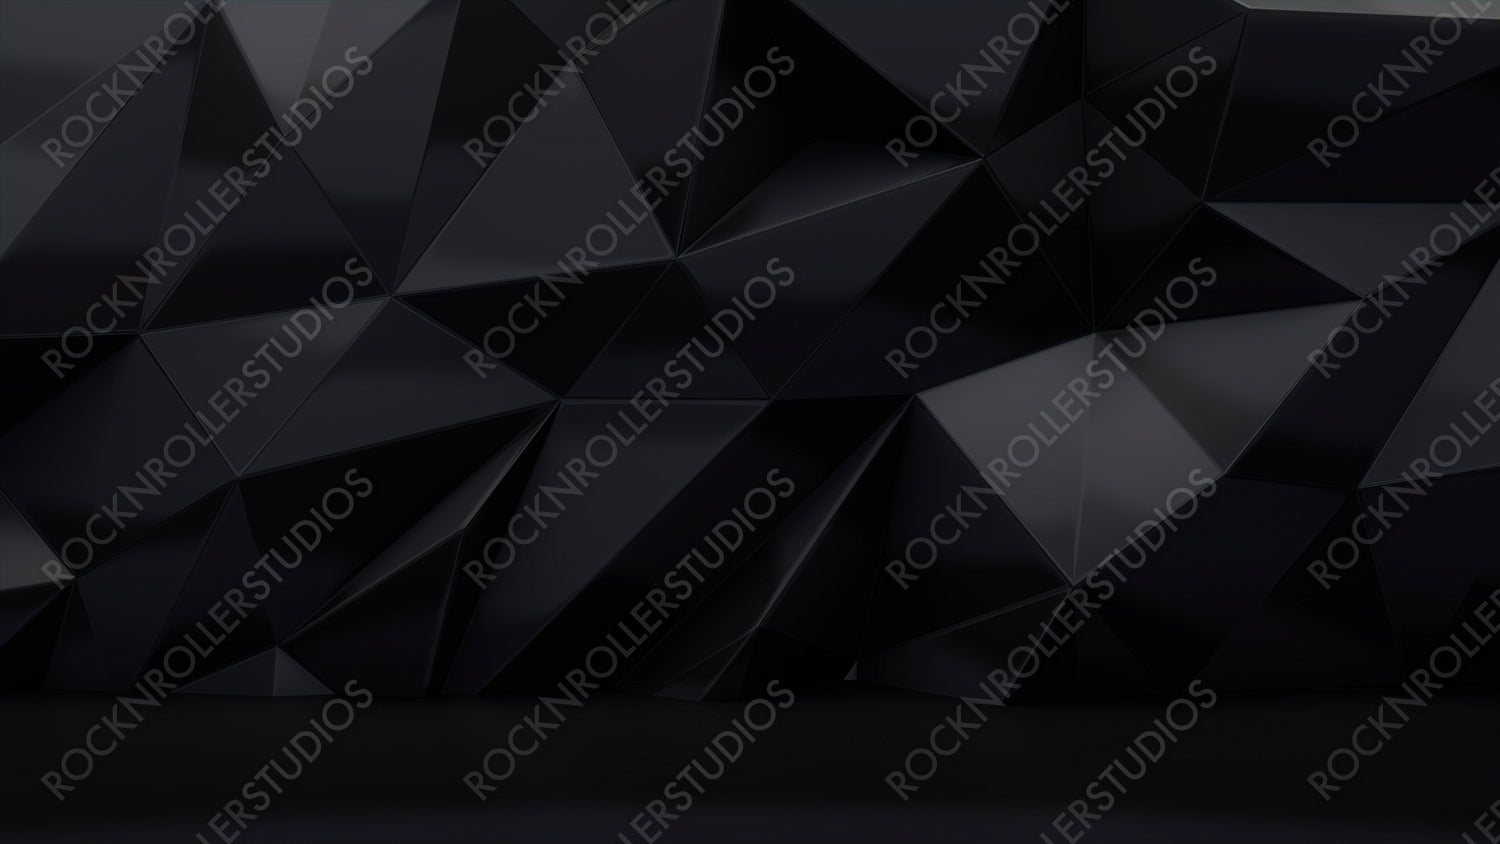 Modern Product Stage with Black 3D Wall. Dark Interior Design Background.